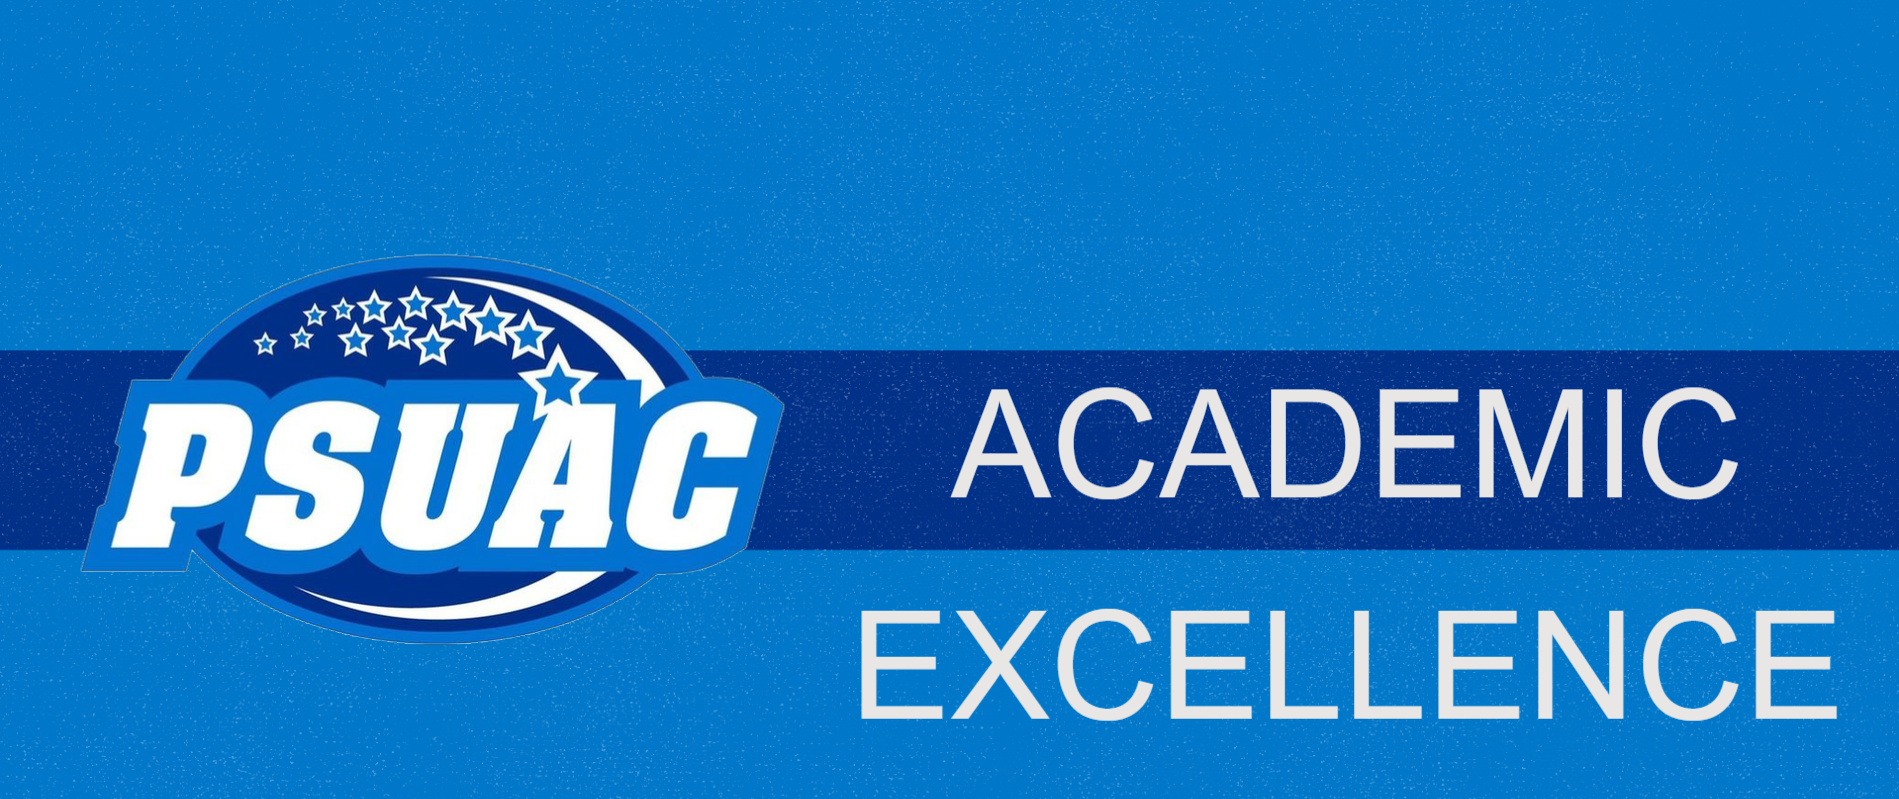 PSUAC Academic Excellence image.